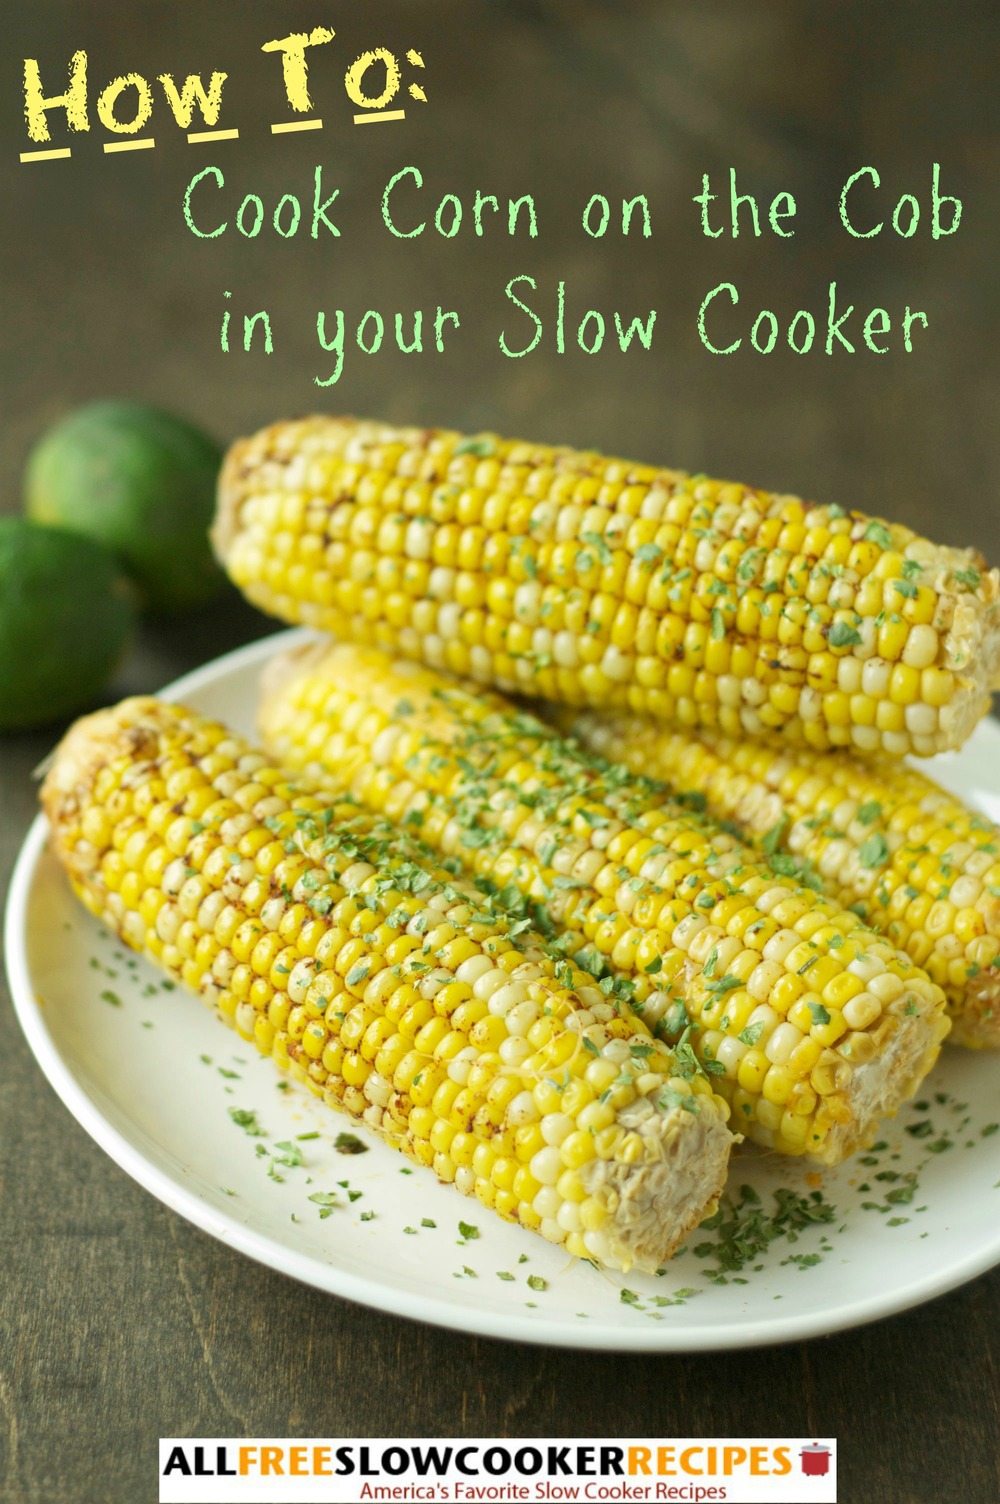 How to Cook Corn on the Cob (in Your Slow Cooker